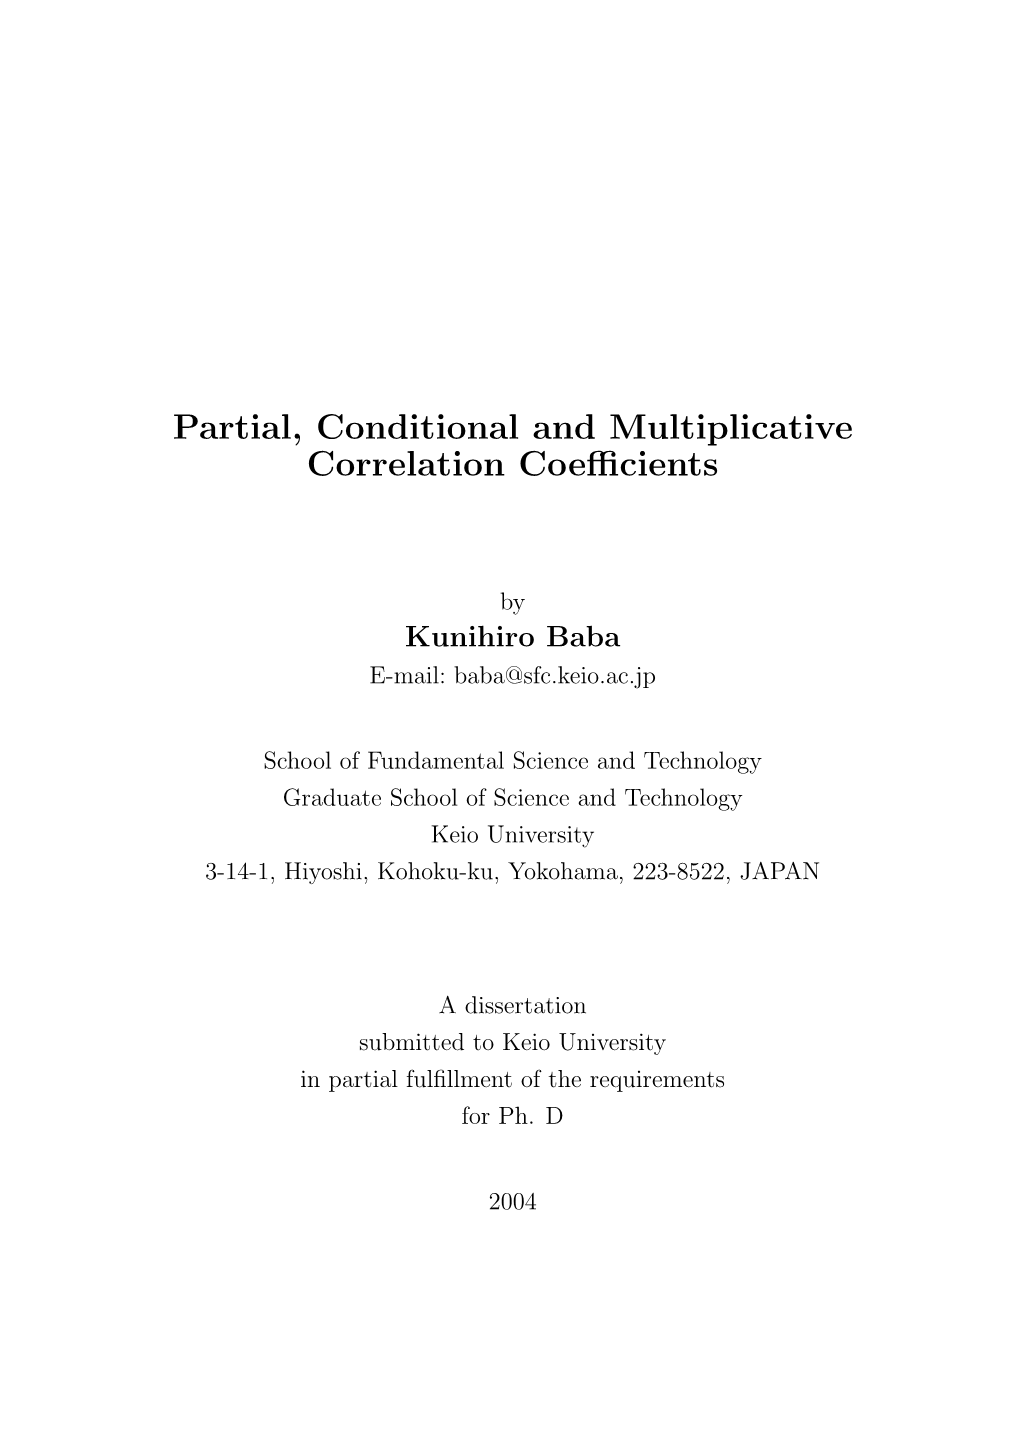 Partial, Conditional and Multiplicative Correlation Coefficients